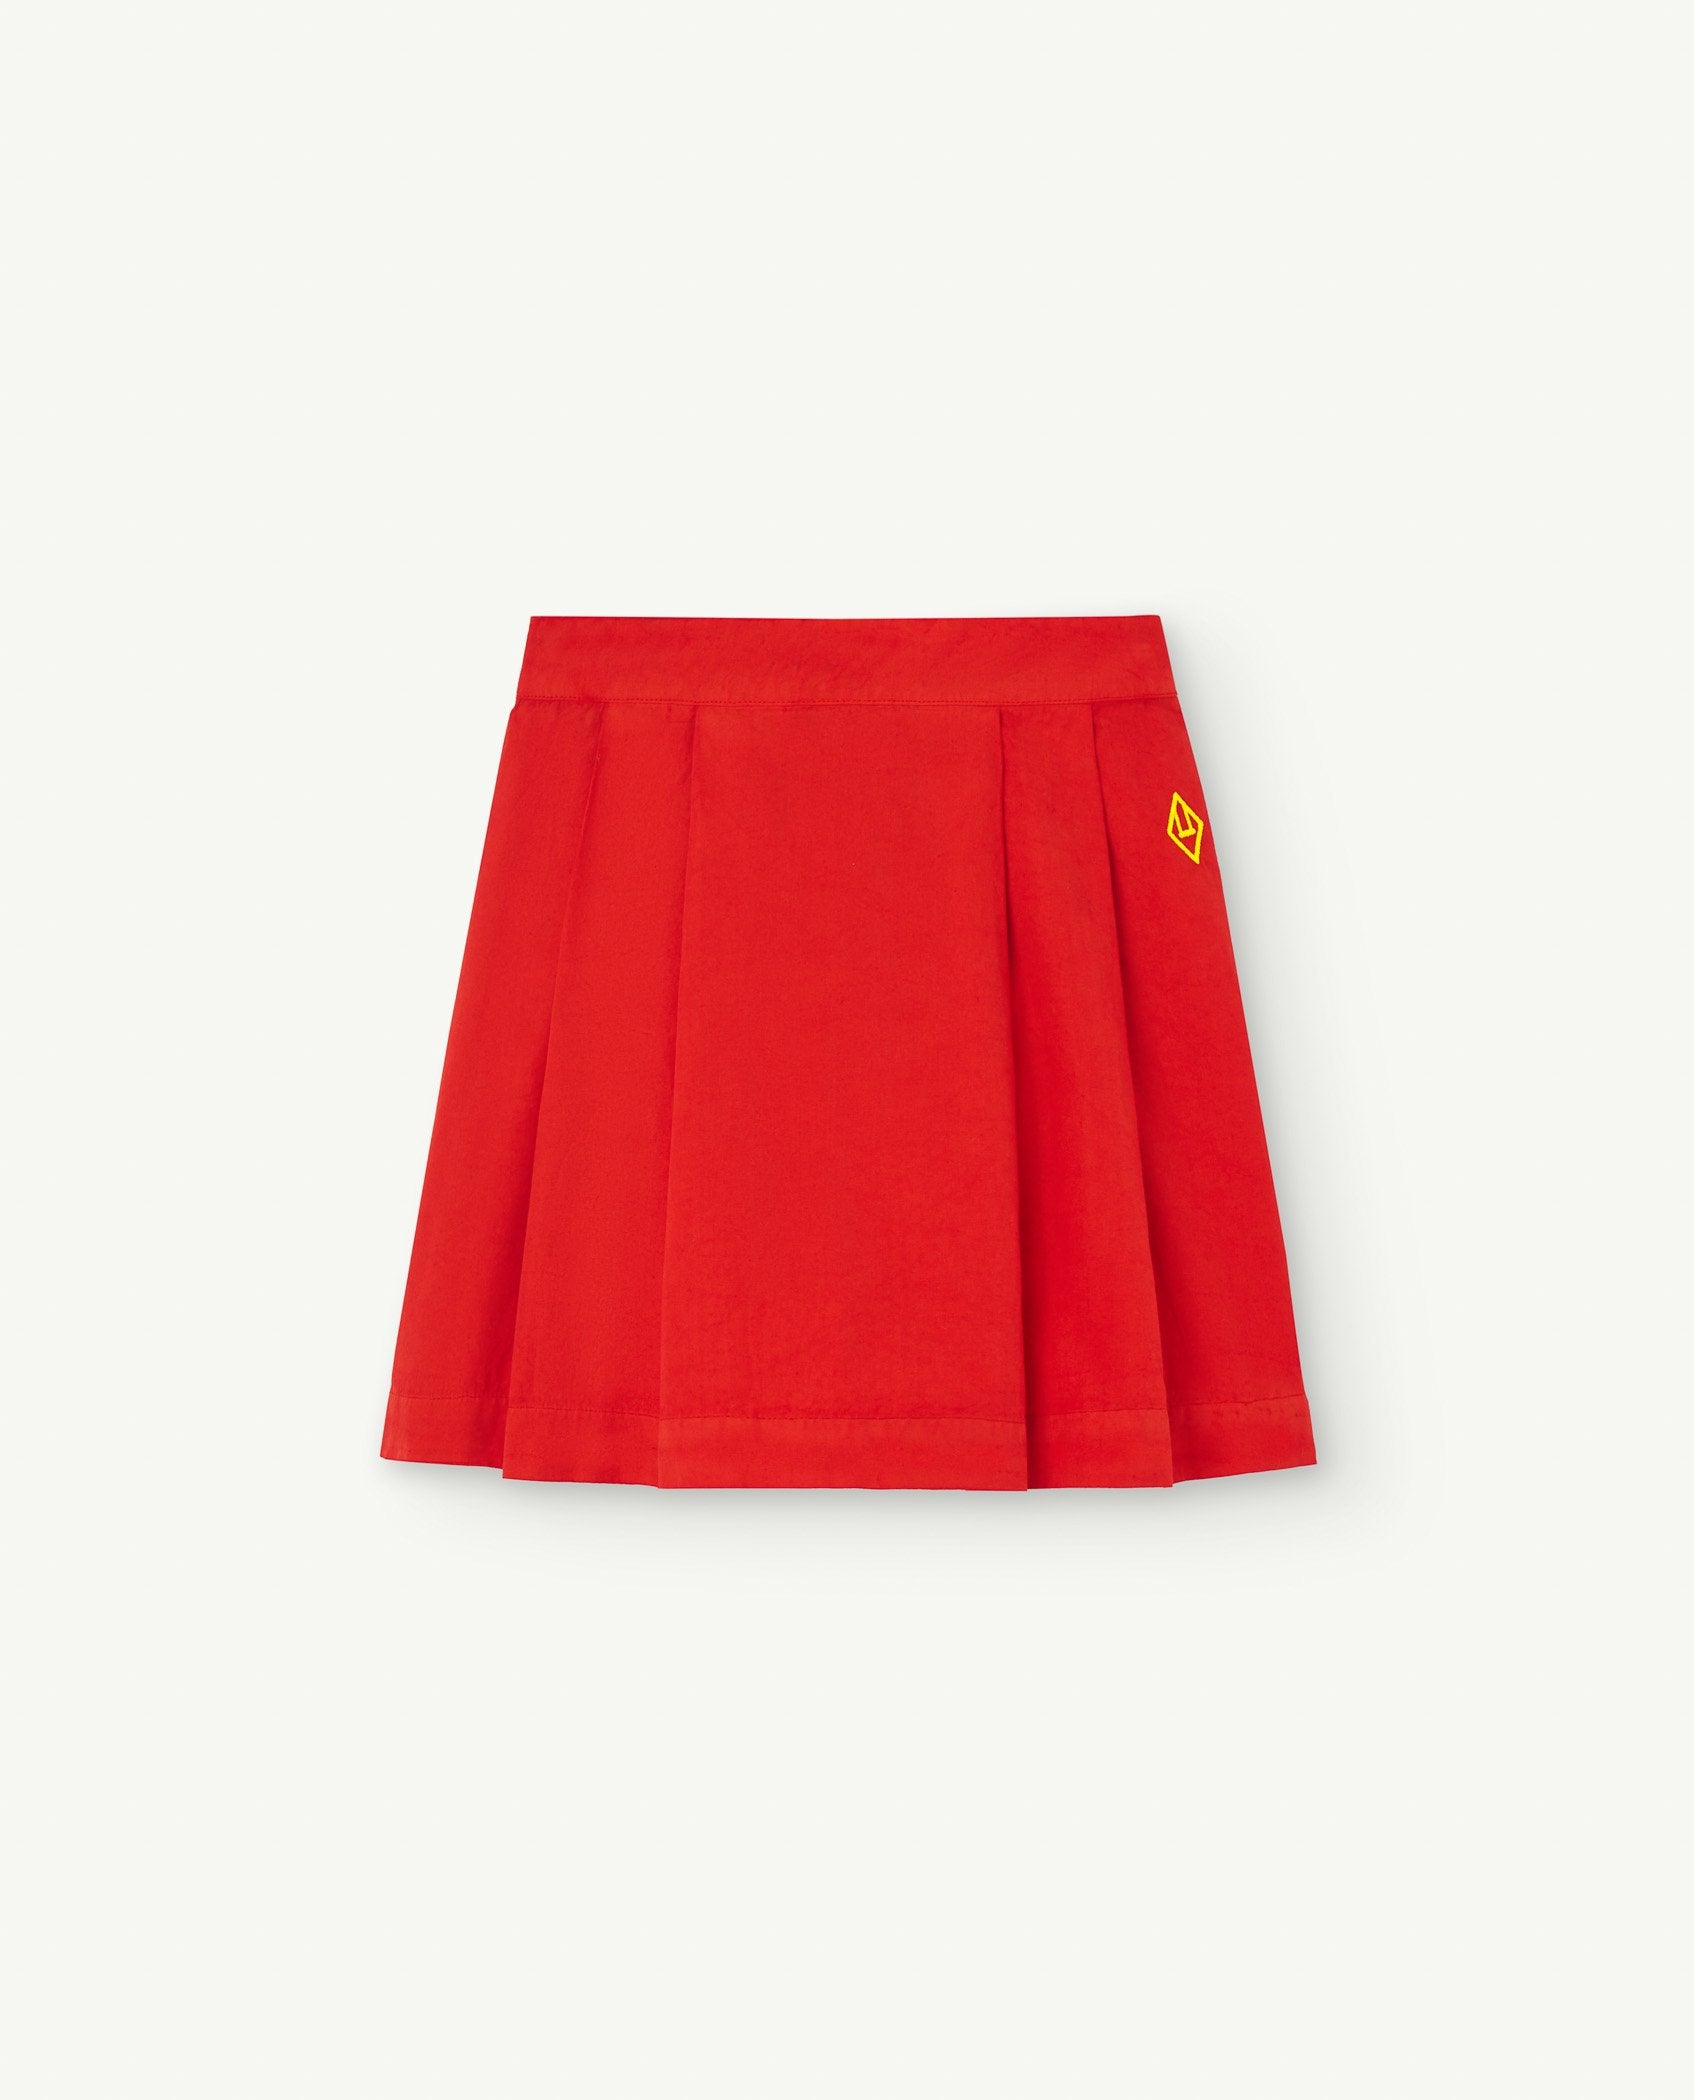 Red Turkey Skirt PRODUCT FRONT